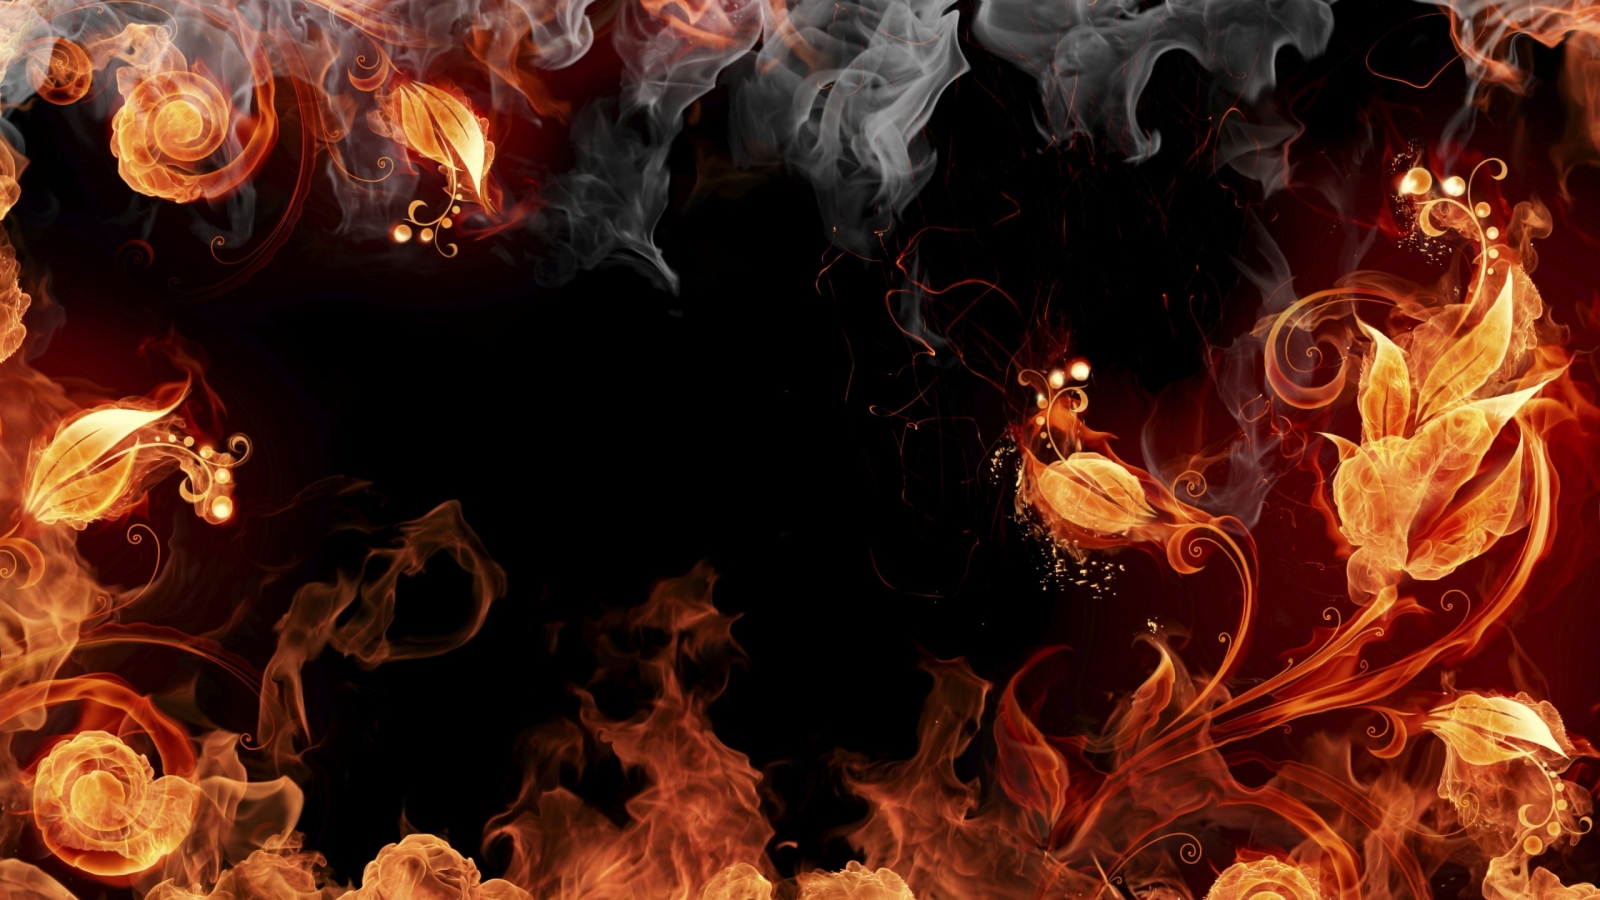 Fire Abstract Art for 1600 x 900 HDTV resolution